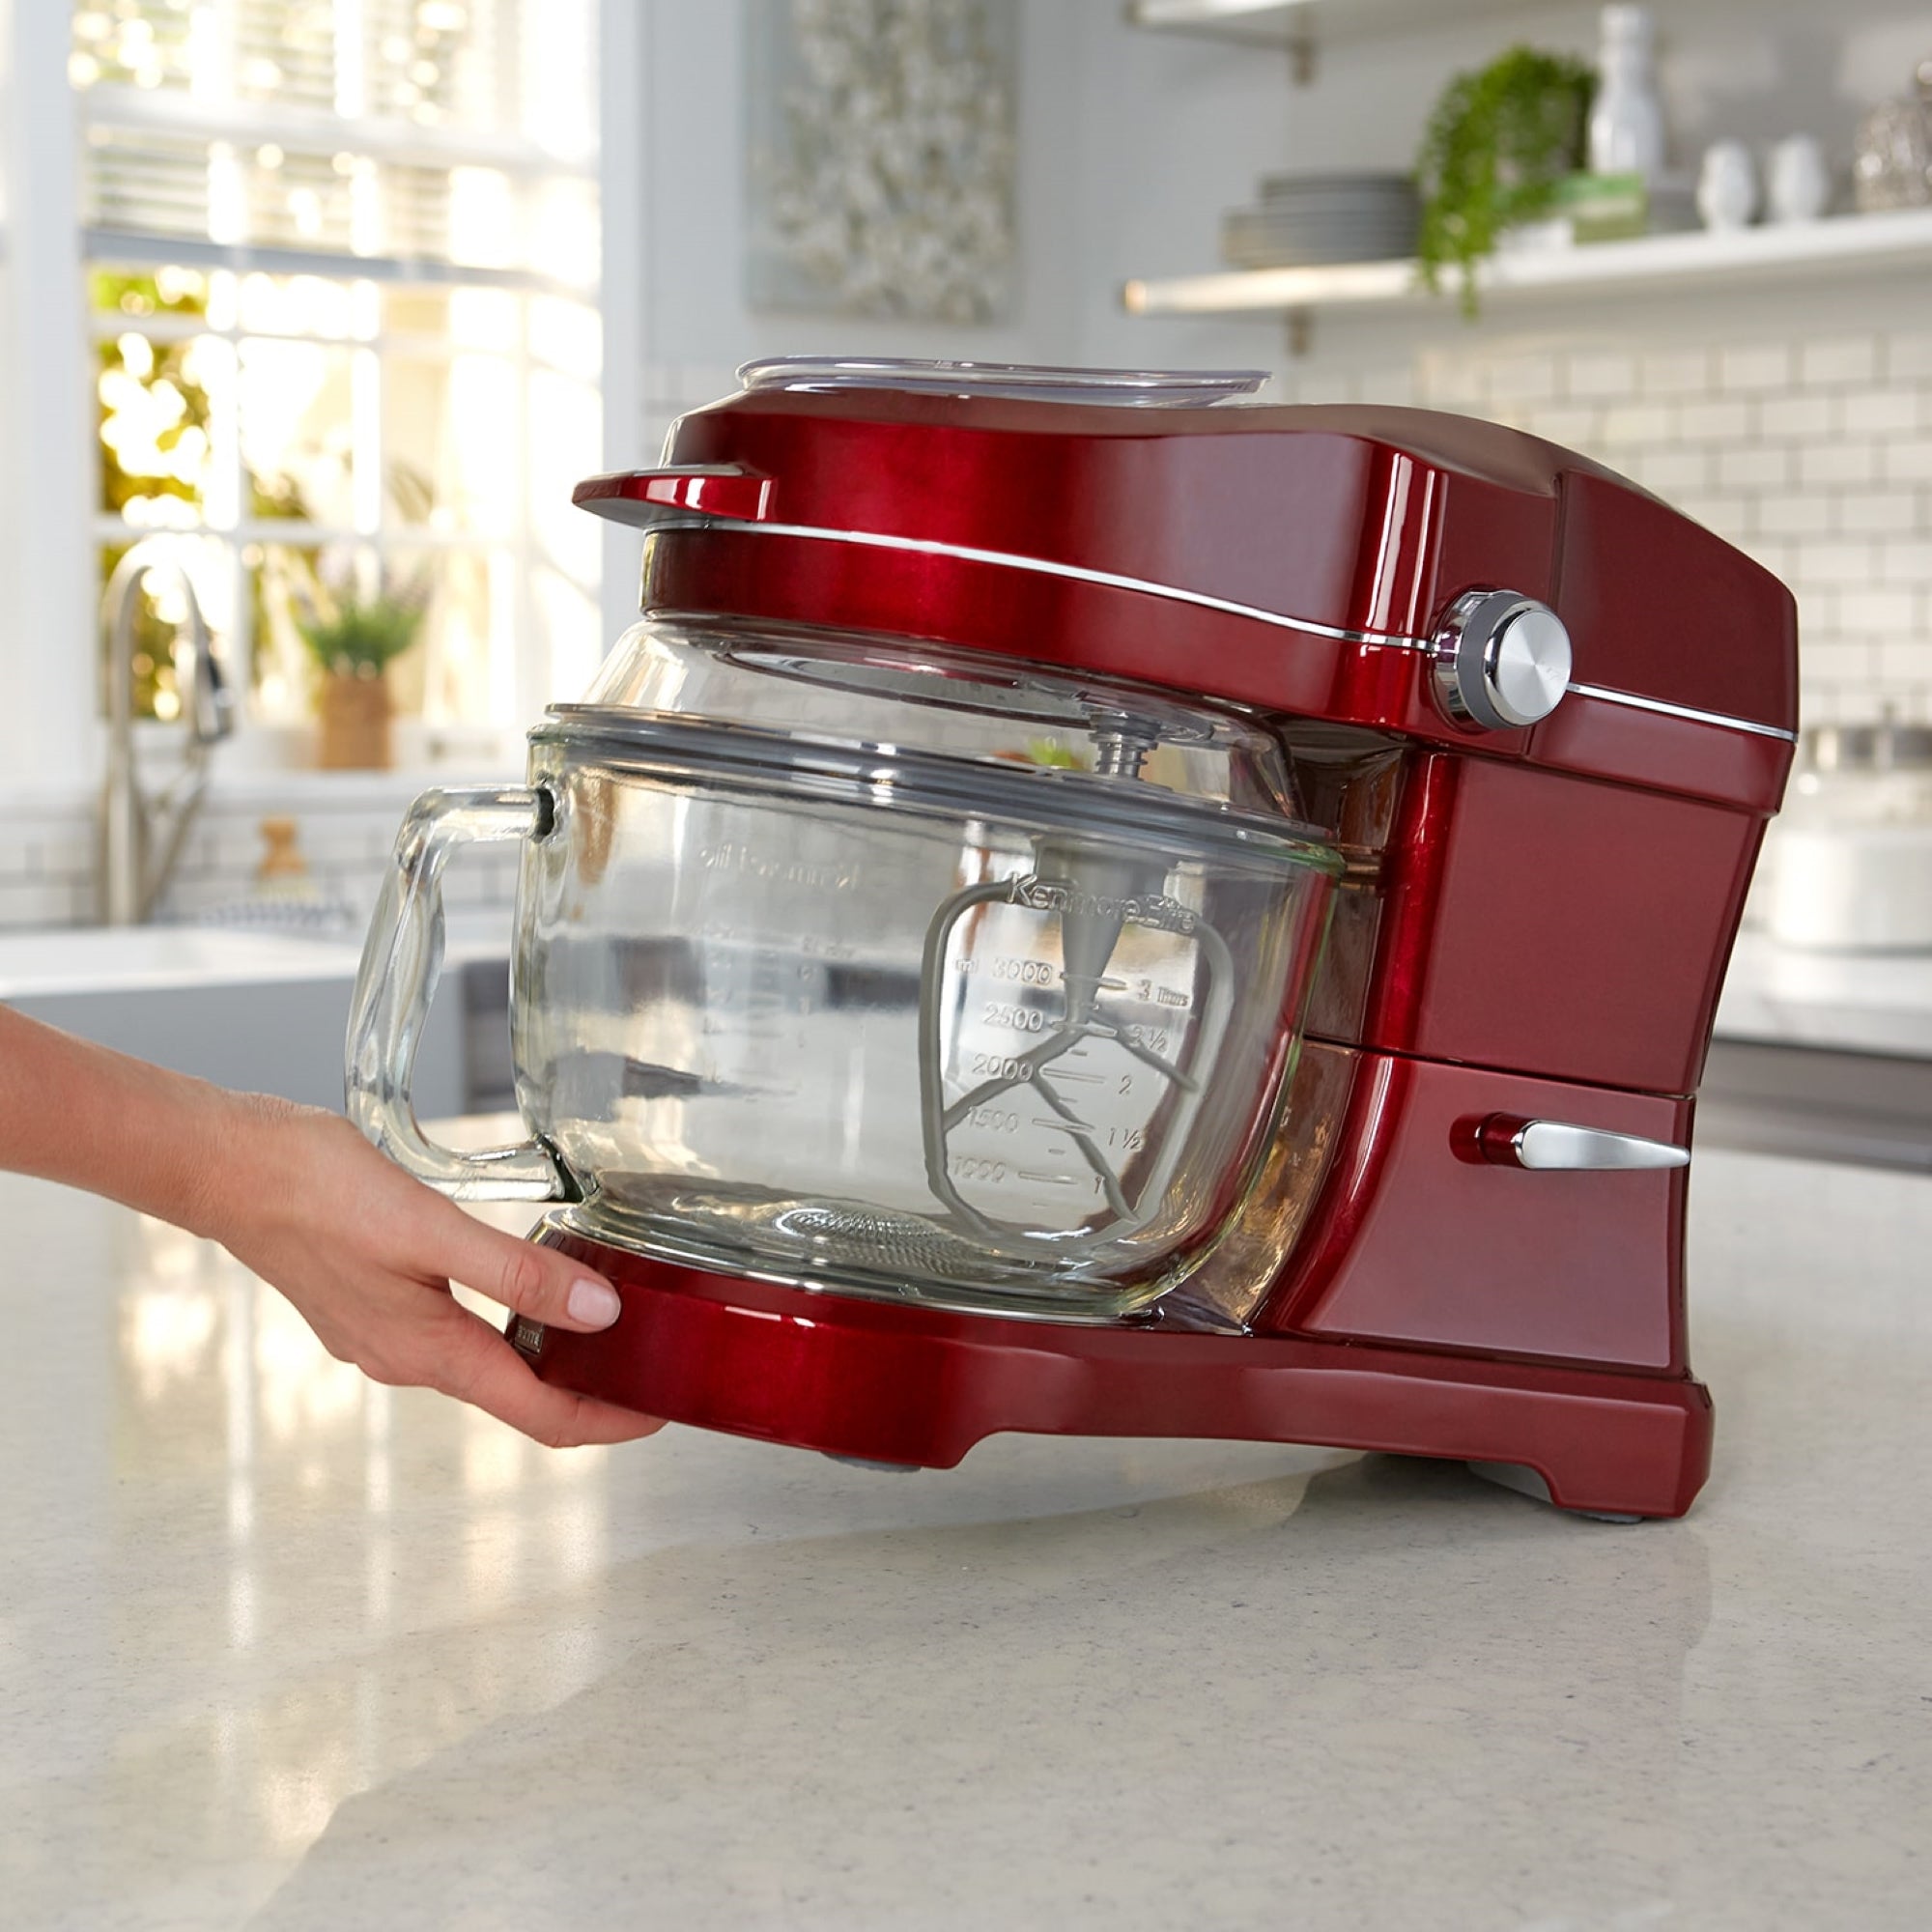 A person's hand tilting the Kenmore Elite Ovation stand mixer to move it using the tilt-and-glide feature across a light-colored kitchen counter with cupboards in the background